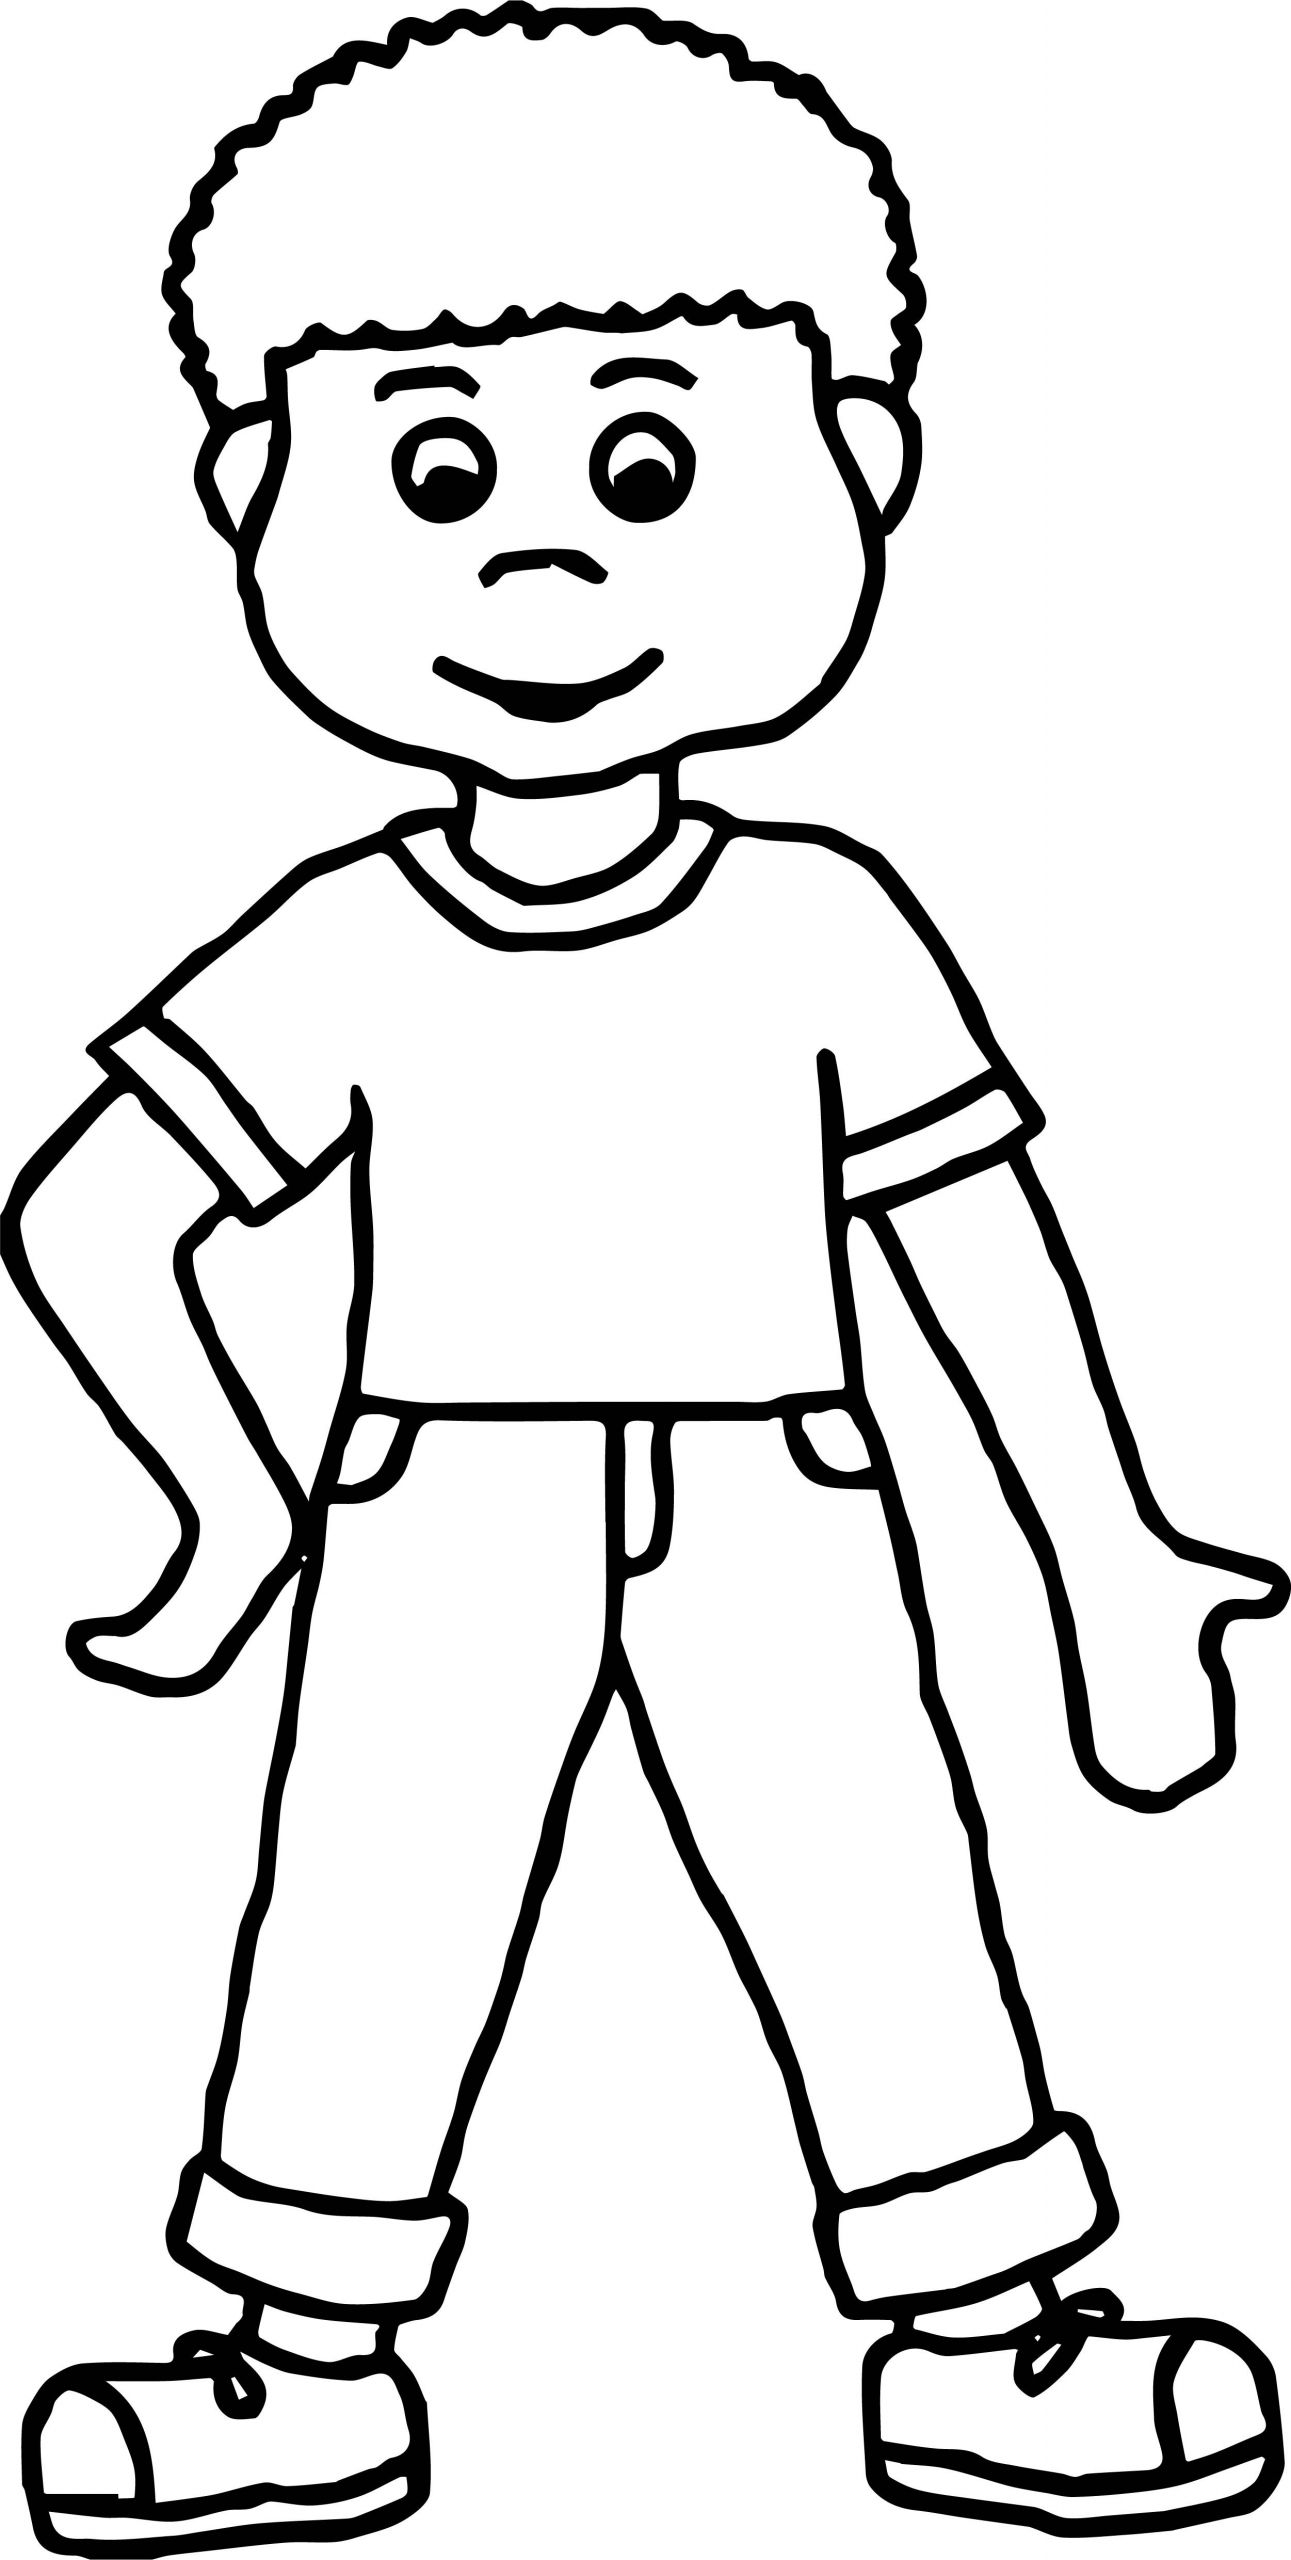 Coloring Pages Of Boys
 Boy Front View Coloring Page